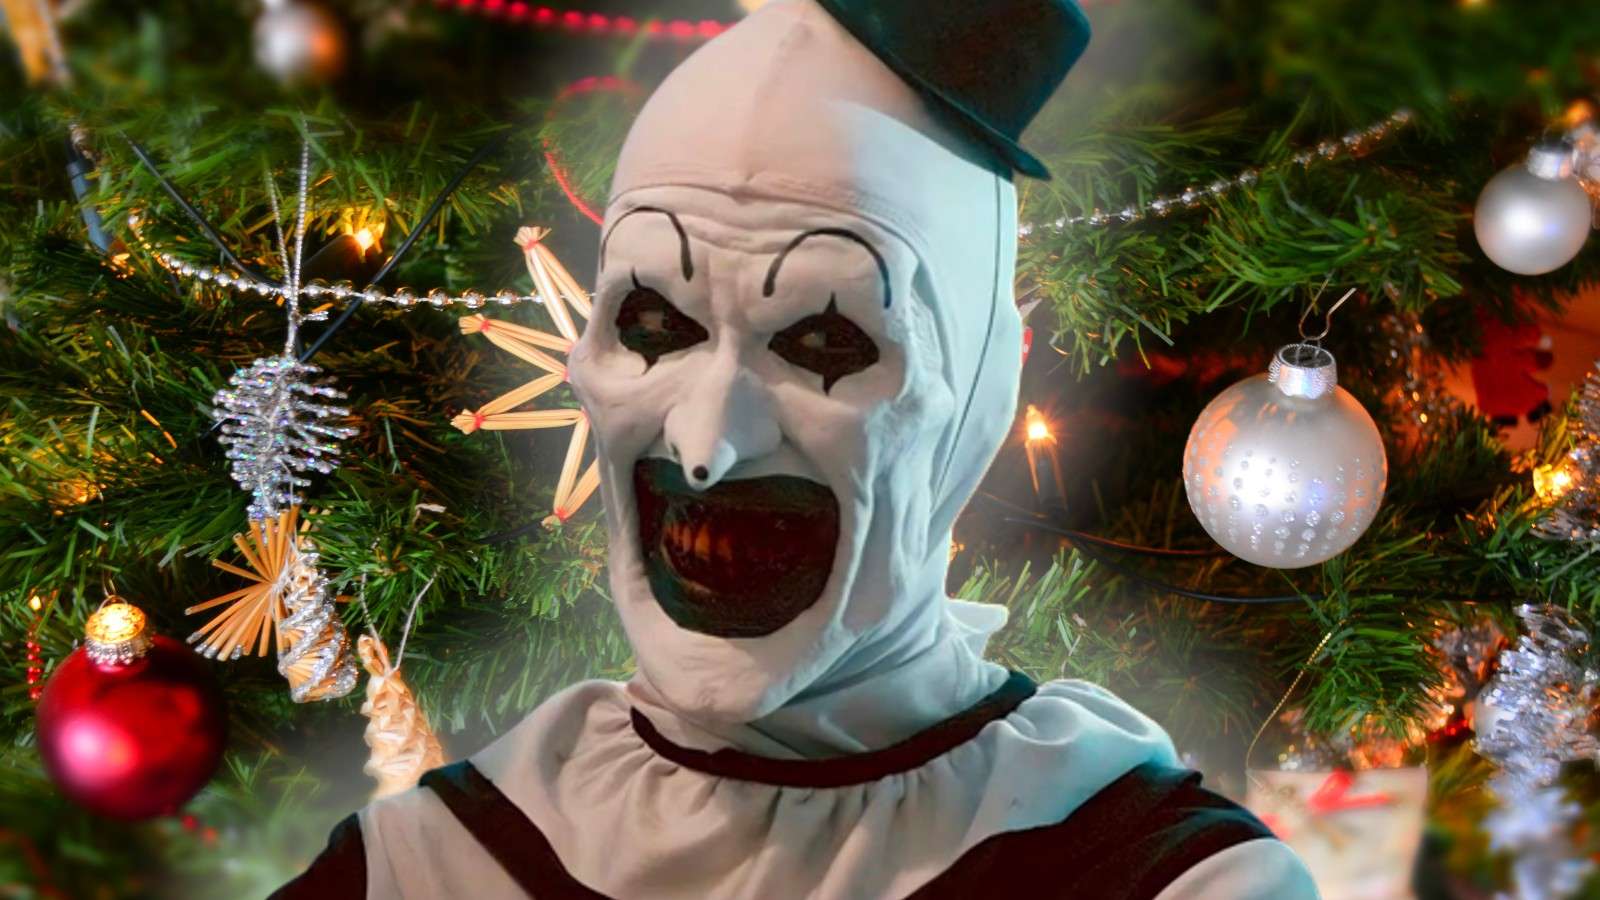 Art the Clown from Terrifier and a Christmas backdrop